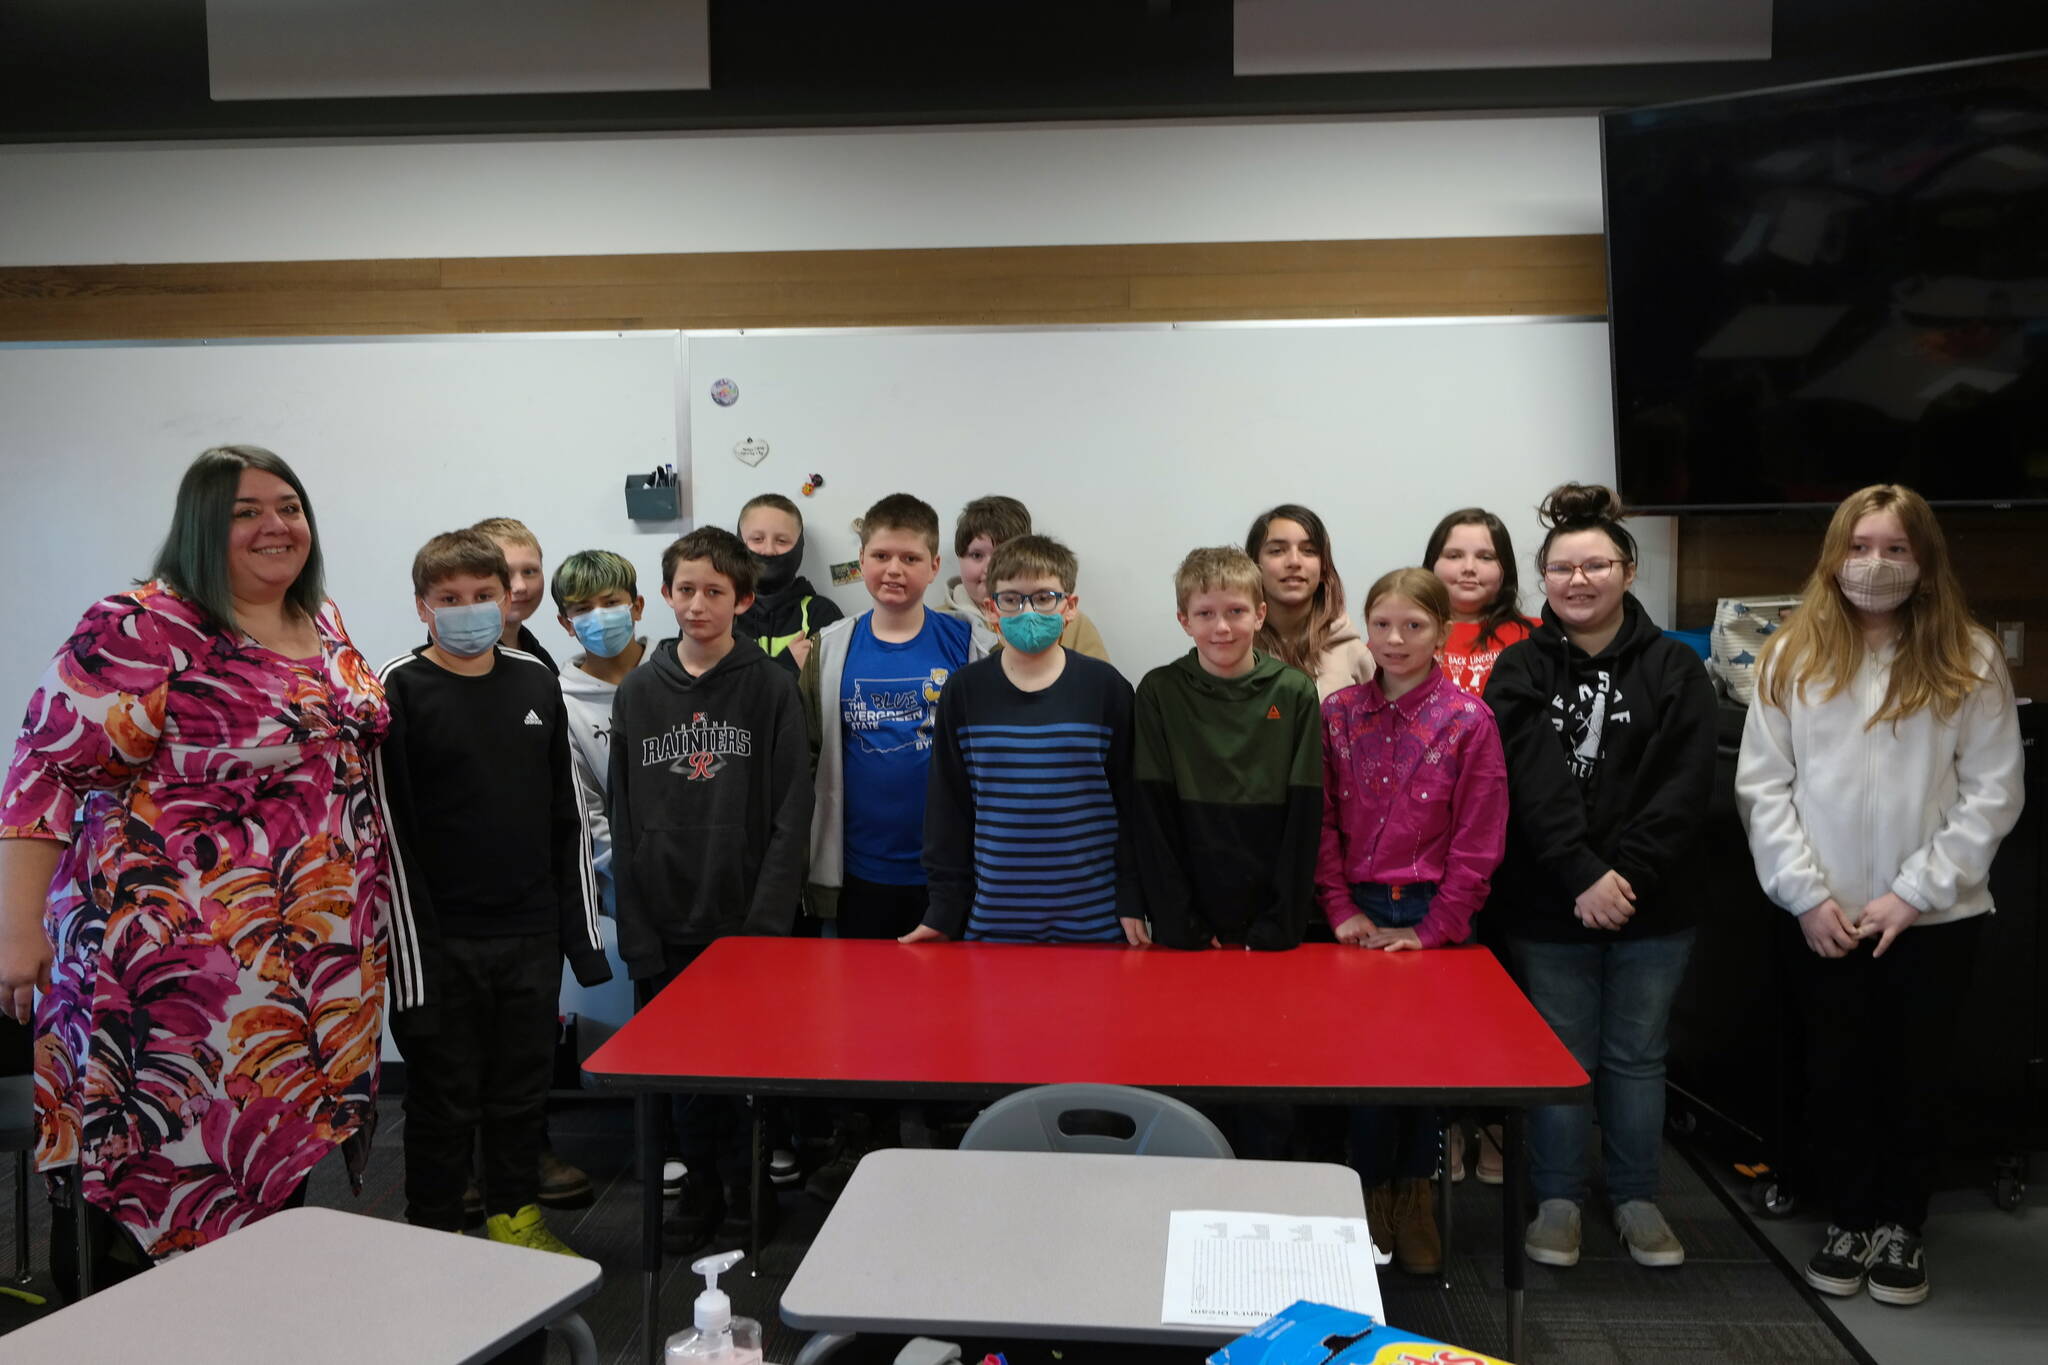 Erika Gebhardt I The Daily World 
Students were surprised and excited when they learned that their request had been taken up by the Grays Harbor County Board of Commissioners. They enjoyed the process of working collaboratively and engaging in research throughout the project.